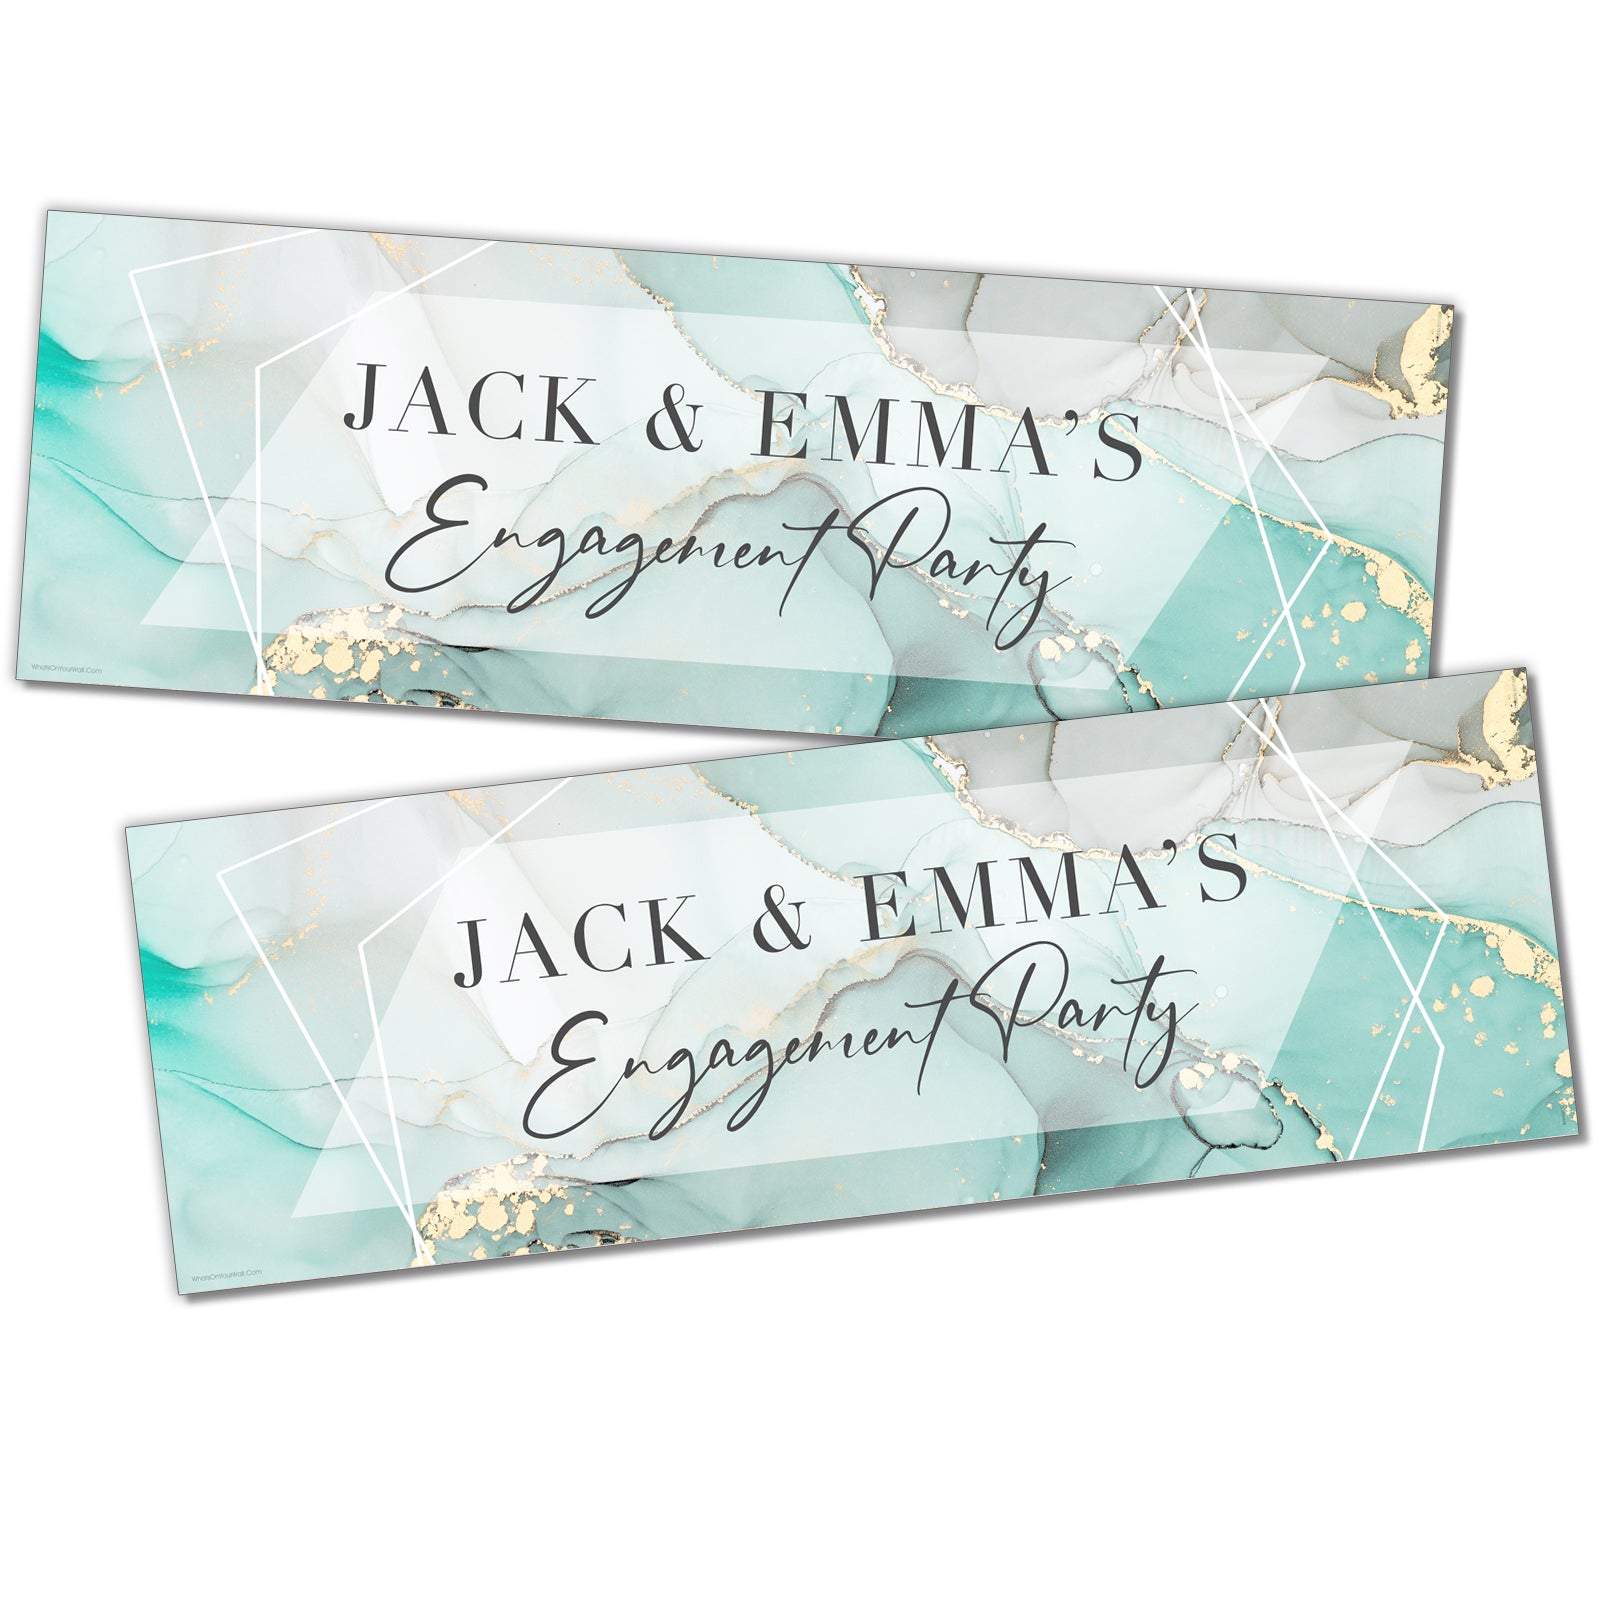 Personalised Engagement Banners